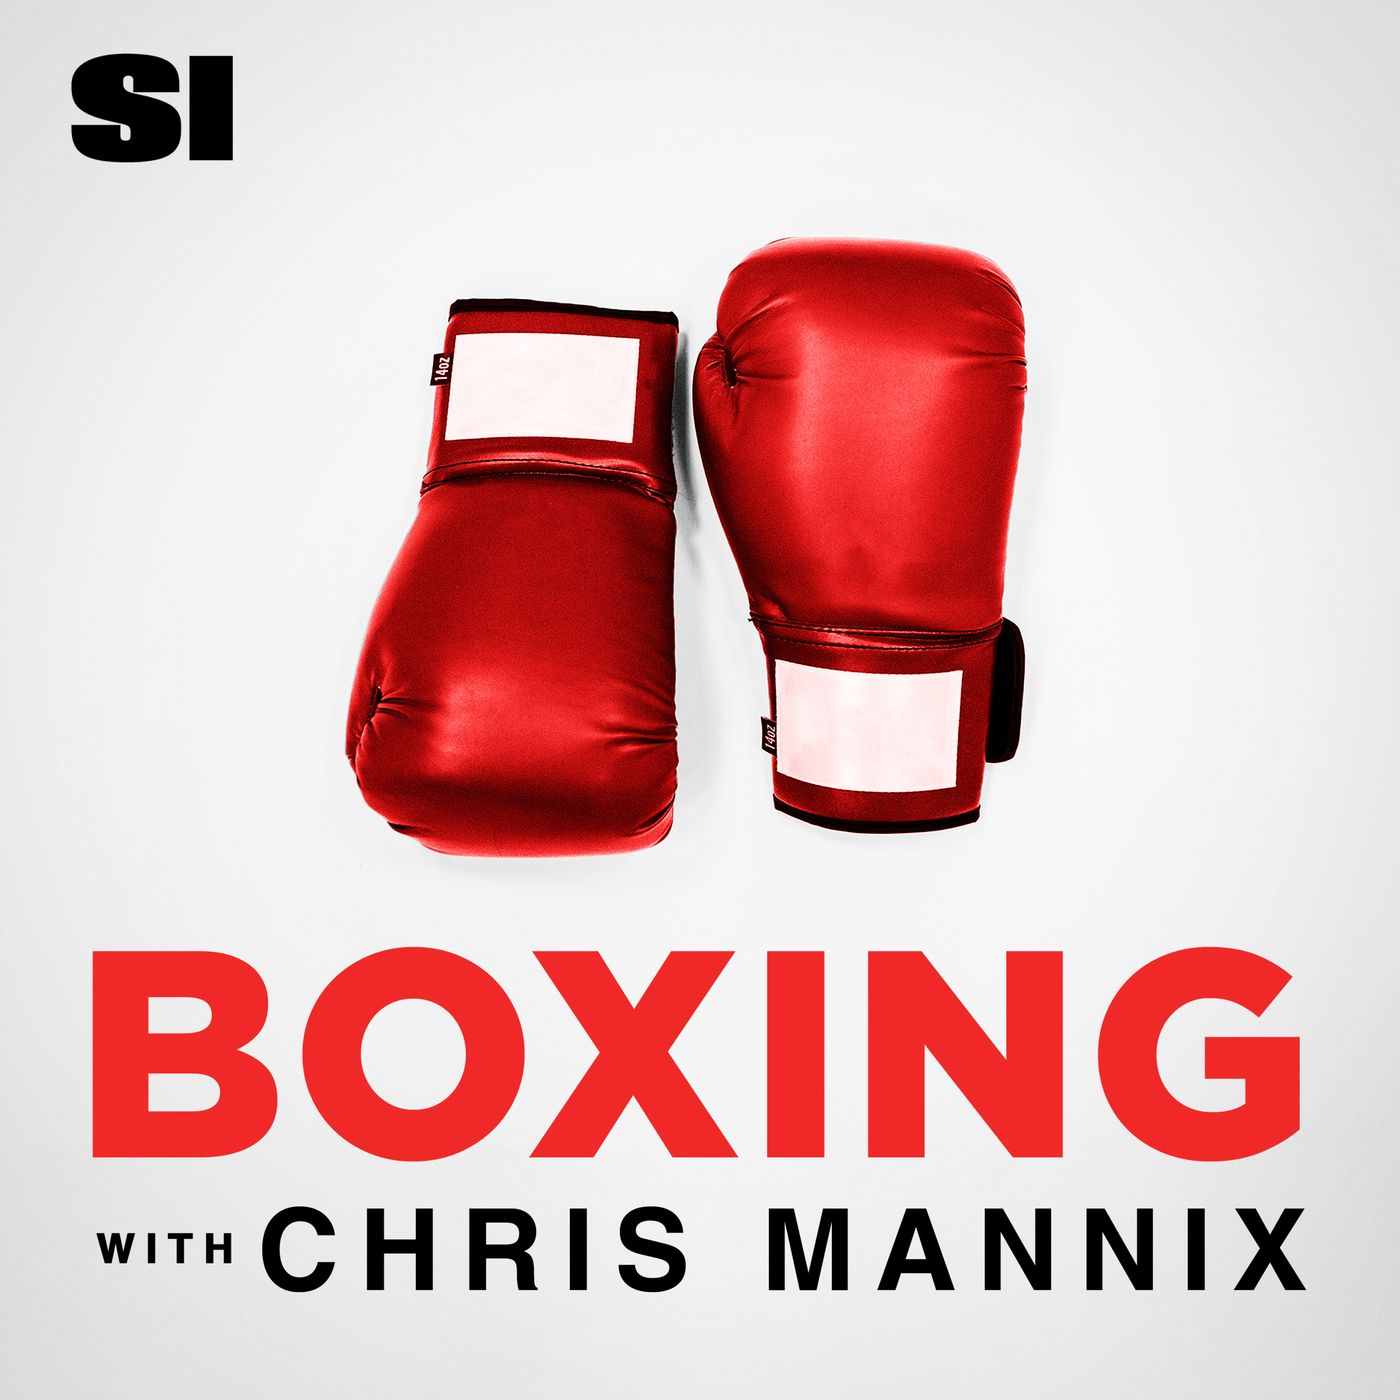 A highlight from Boxing with Chris Mannix - Tyson Fury and Daniel Cormier stop by